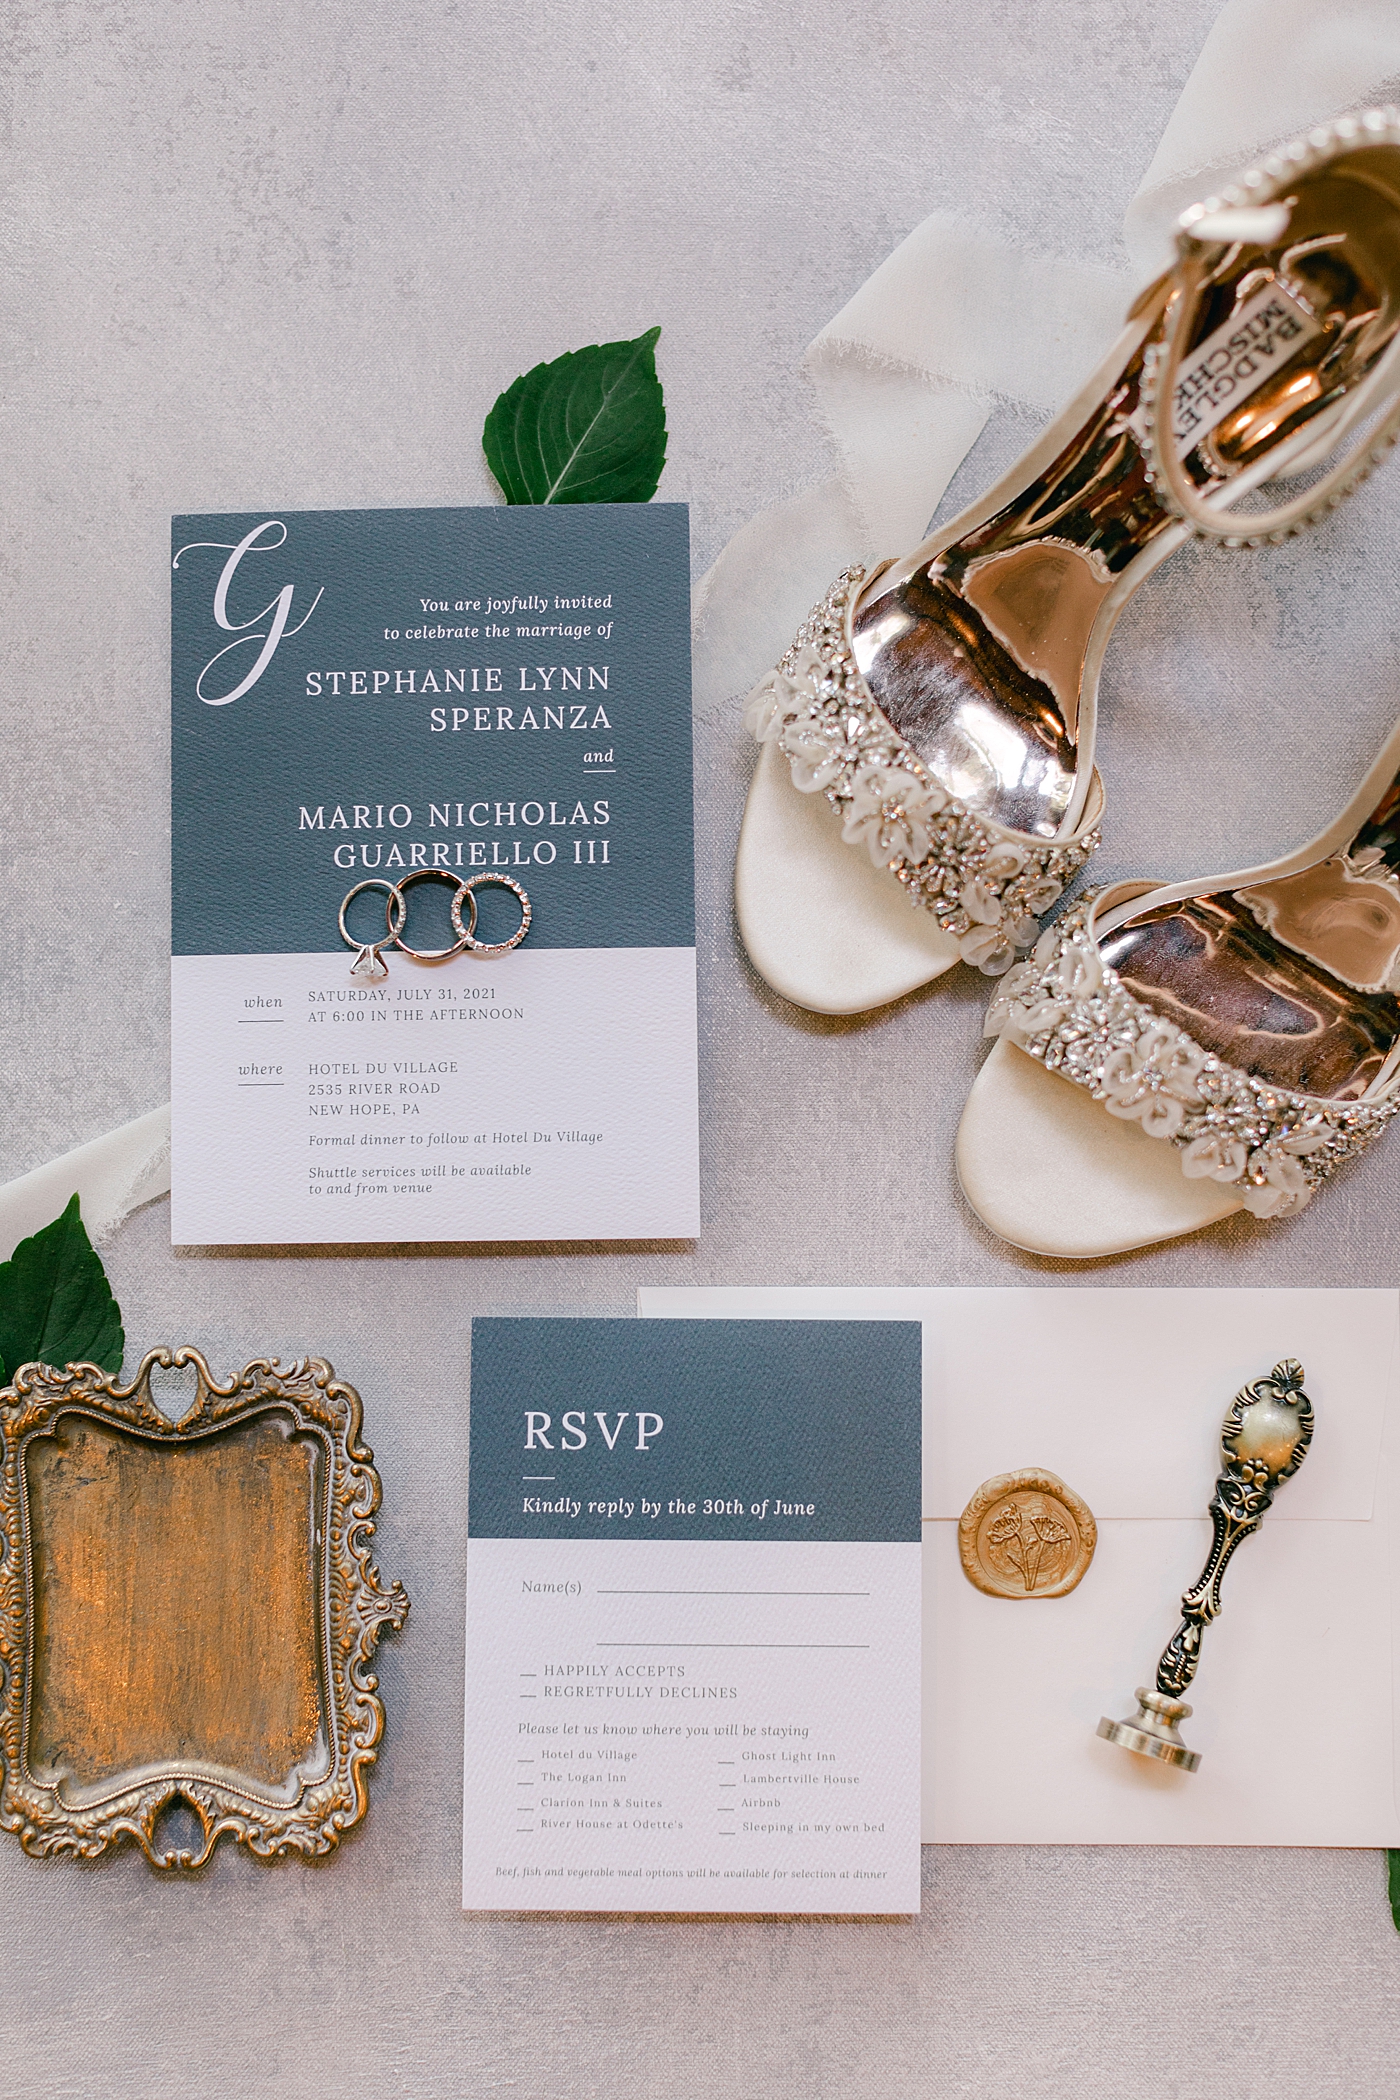 Wedding invitation styled with brides shoes | Image by Hope Helmuth Photography